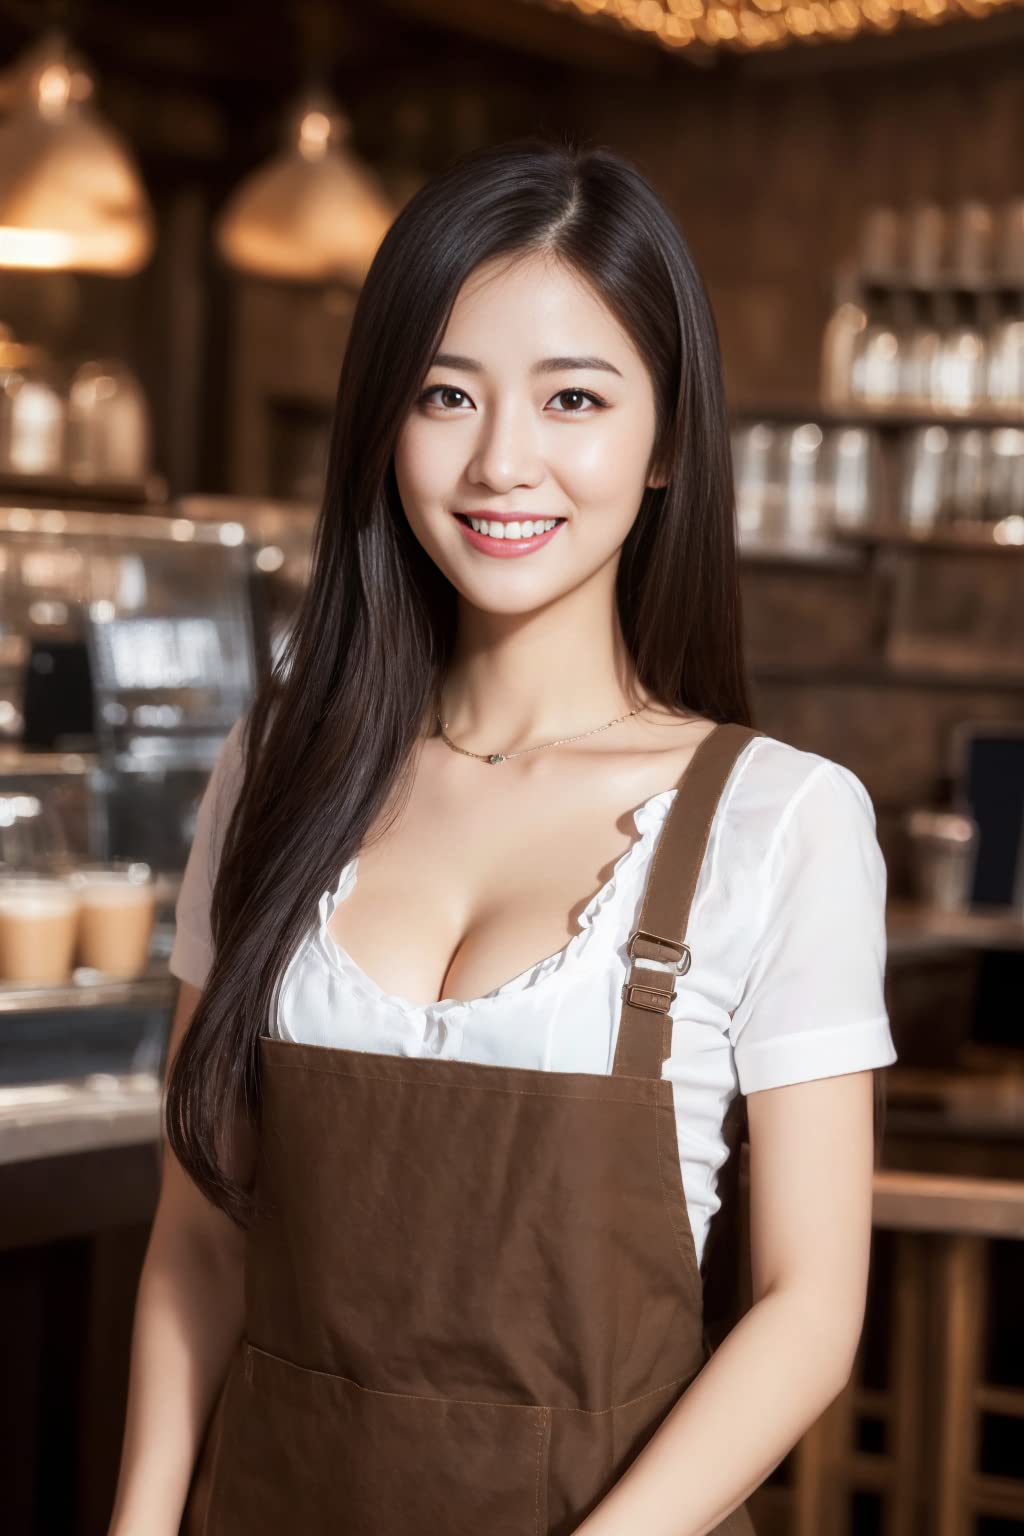 Beauty is justice Delivering Smiles and Warmth Seduction collection of beautiful cafe waitresses Next Generation Gravure Photo Collection by AI Next Generation ... Photo Collection by AI (Japanese Edition)